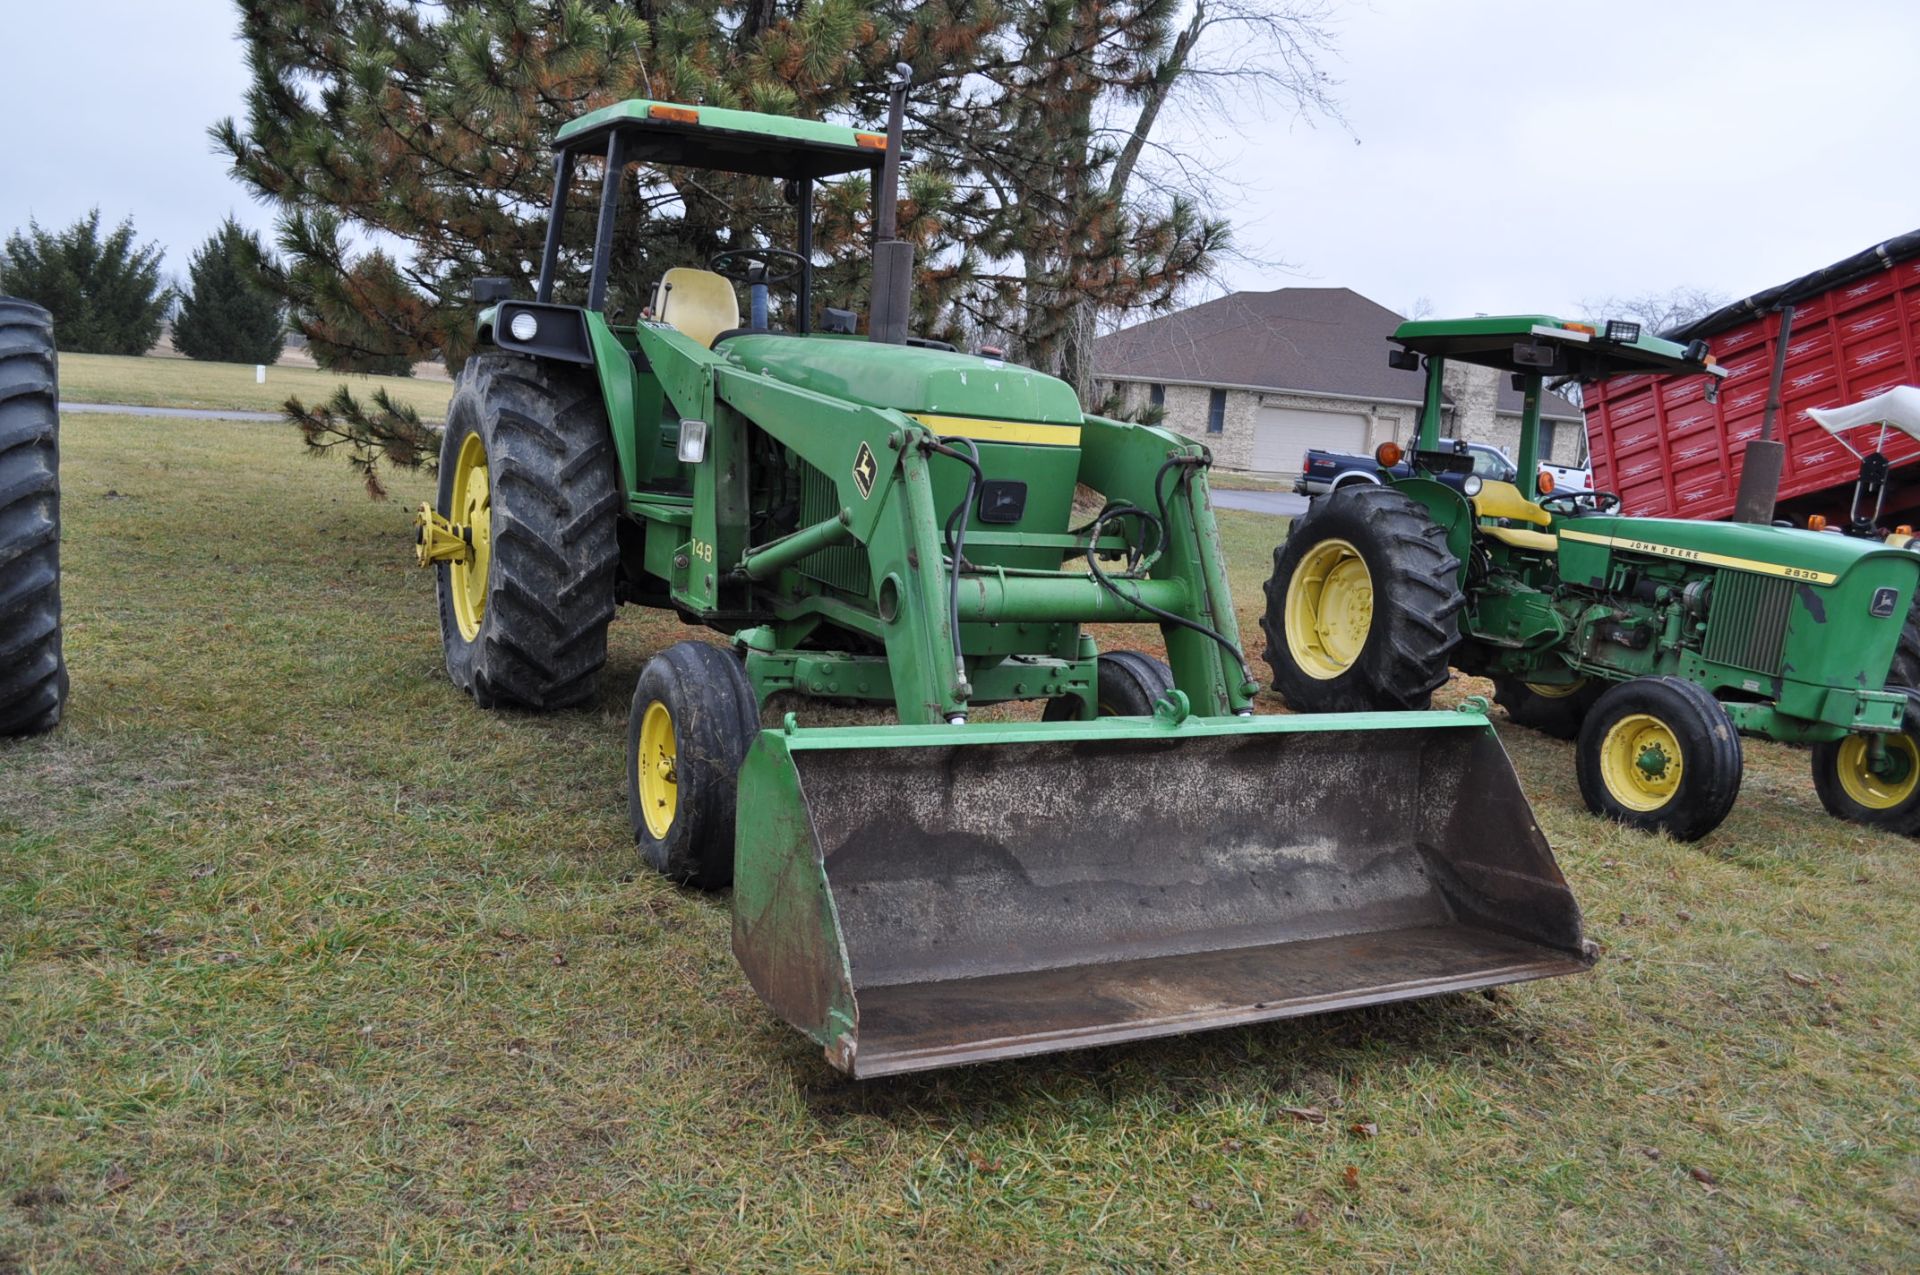 John Deere 4030 tractor, diesel, 18.4-34 rear duals, rear wts, 9.5-15 front, 4-post canopy, Syncro, - Image 4 of 26